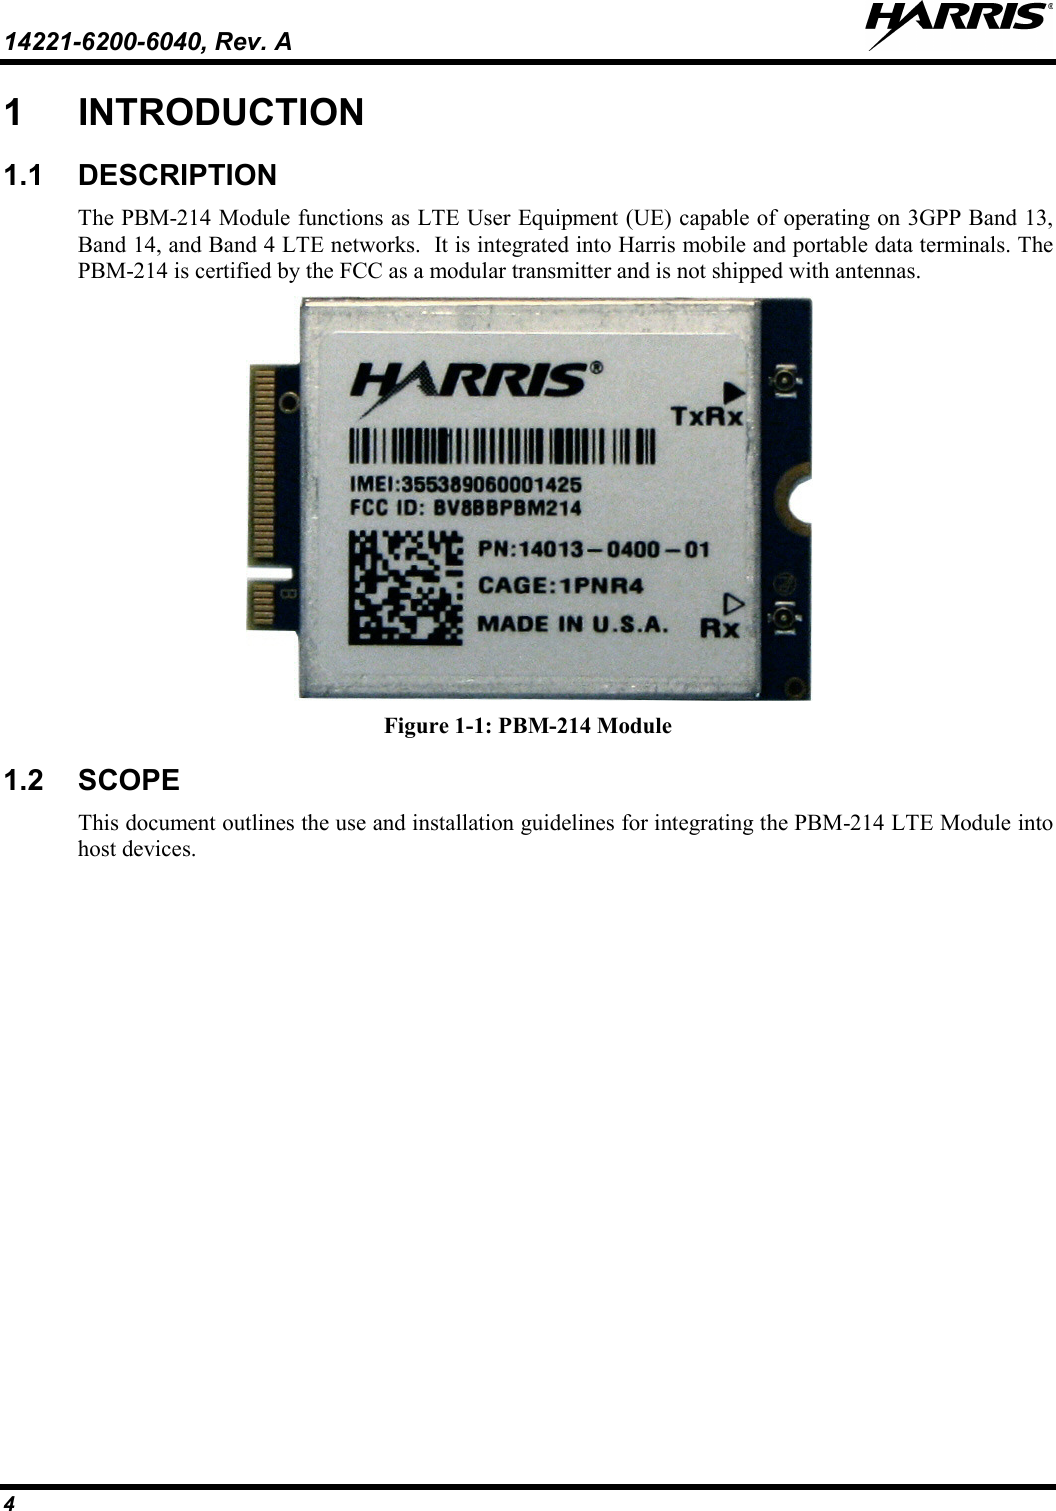 14221-6200-6040, Rev. A   4 1  INTRODUCTION 1.1 DESCRIPTION The PBM-214 Module functions as LTE User Equipment (UE) capable of operating on 3GPP Band 13, Band 14, and Band 4 LTE networks.  It is integrated into Harris mobile and portable data terminals. The PBM-214 is certified by the FCC as a modular transmitter and is not shipped with antennas.  Figure 1-1: PBM-214 Module 1.2  SCOPE This document outlines the use and installation guidelines for integrating the PBM-214 LTE Module into host devices.    